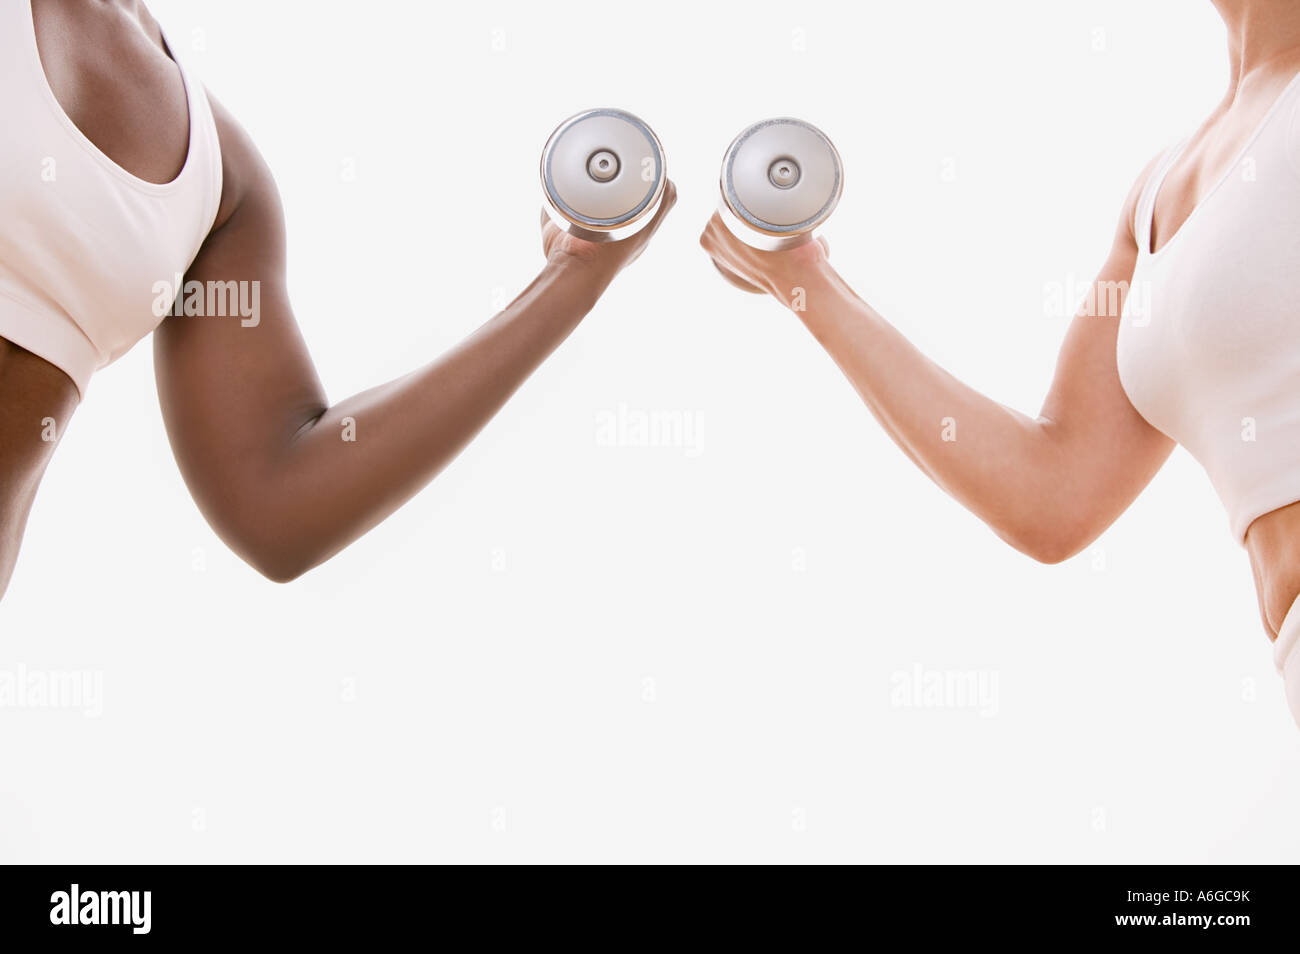 Two women weightlifting Stock Photo